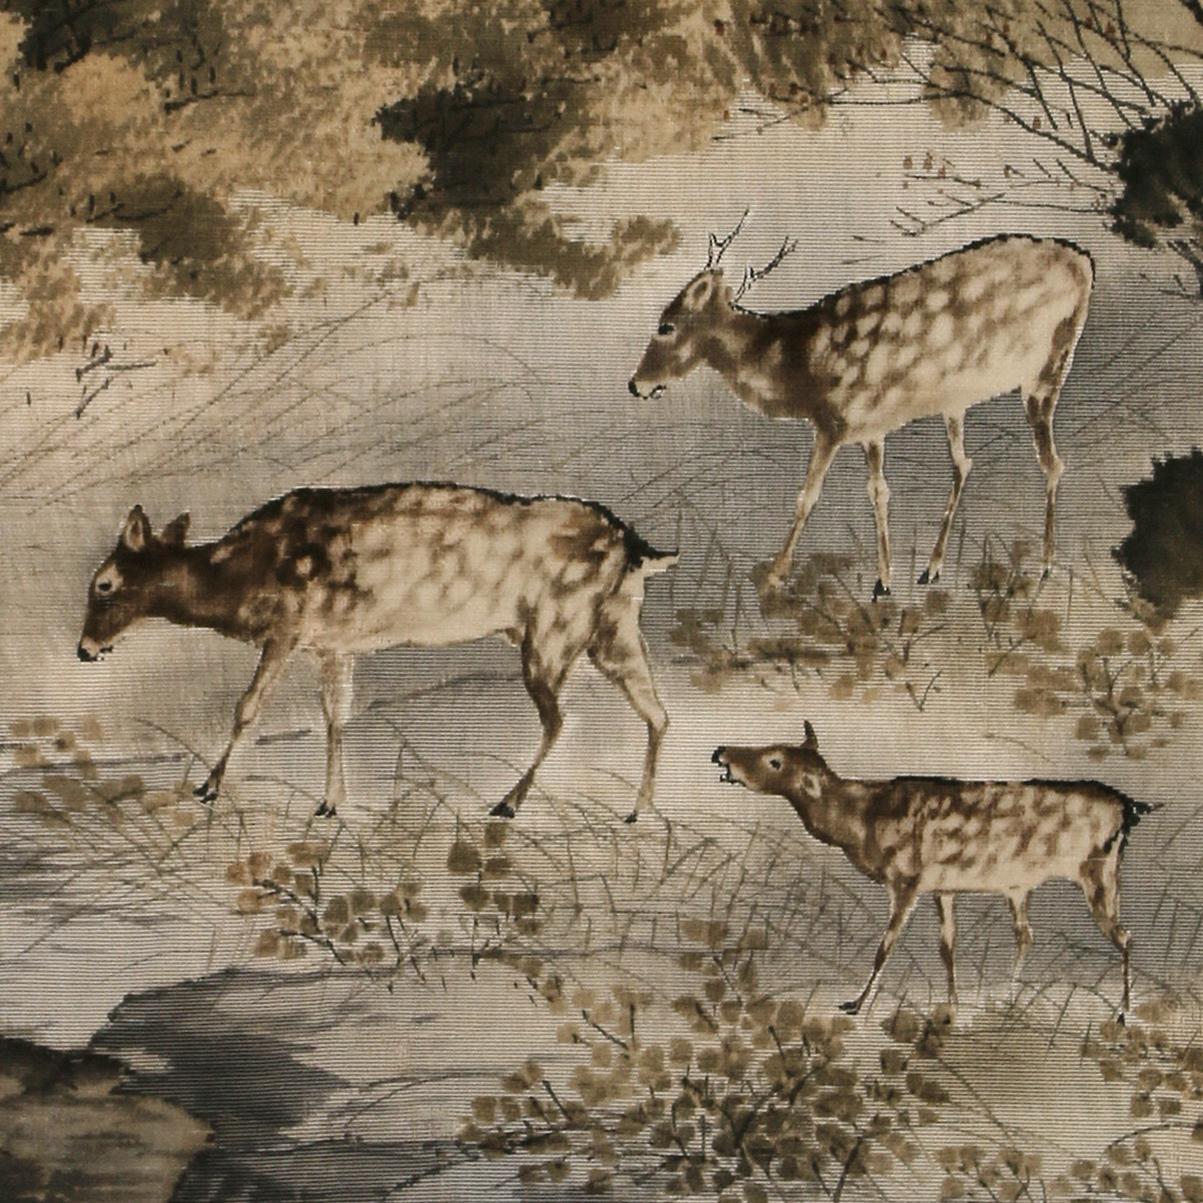 It was love at first sight for us with this stunning Japanese pastoral scene on fabric. Beautifully painting with soft, muted colors, the piece captures a lovely moment in the mountains where a family of deer appear ready to cross a creek.  The